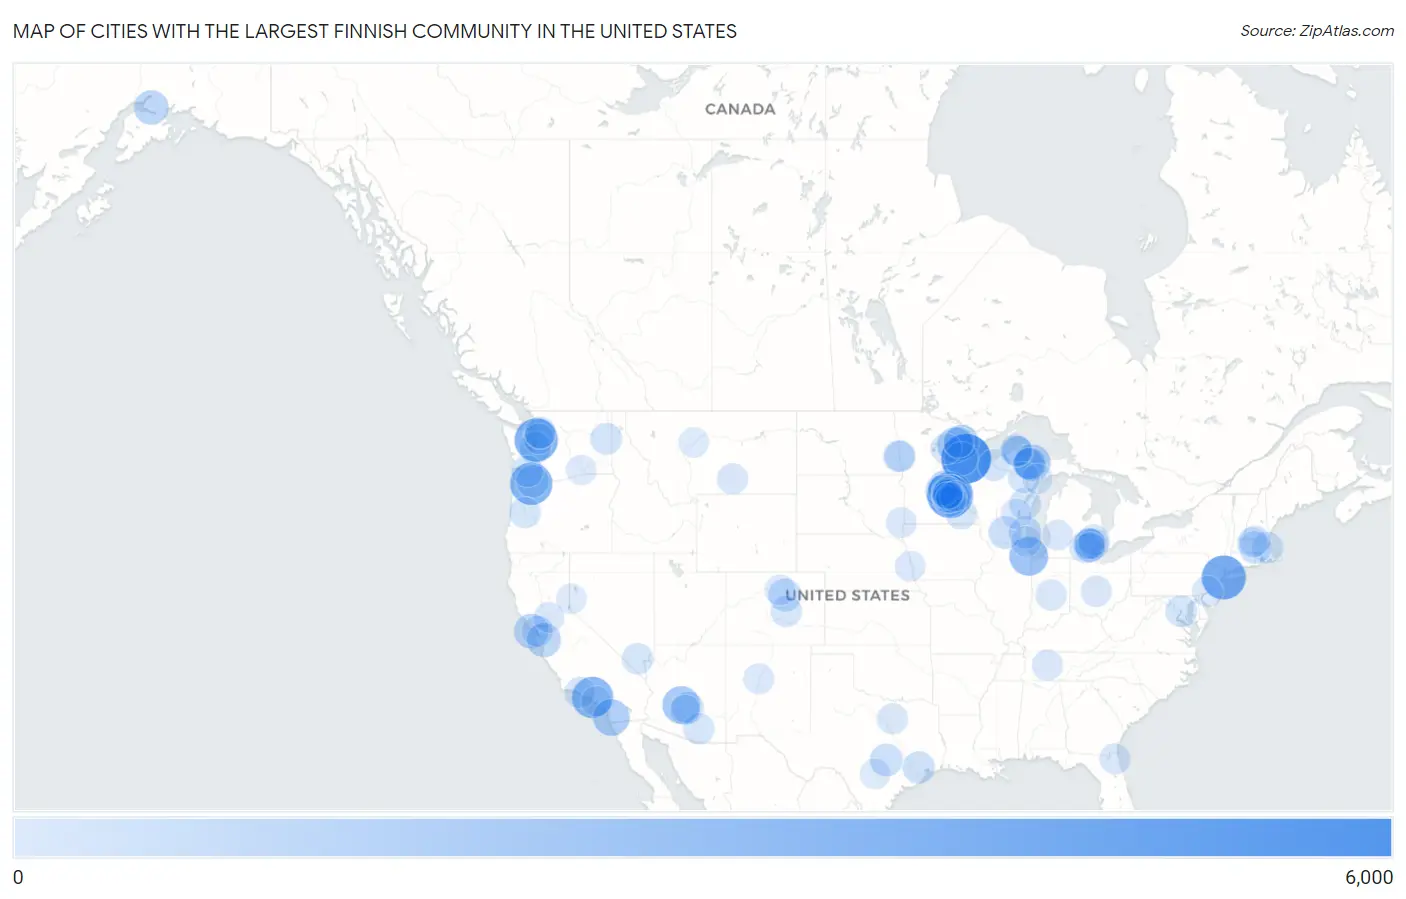 Cities with the Largest Finnish Community in the United States Map